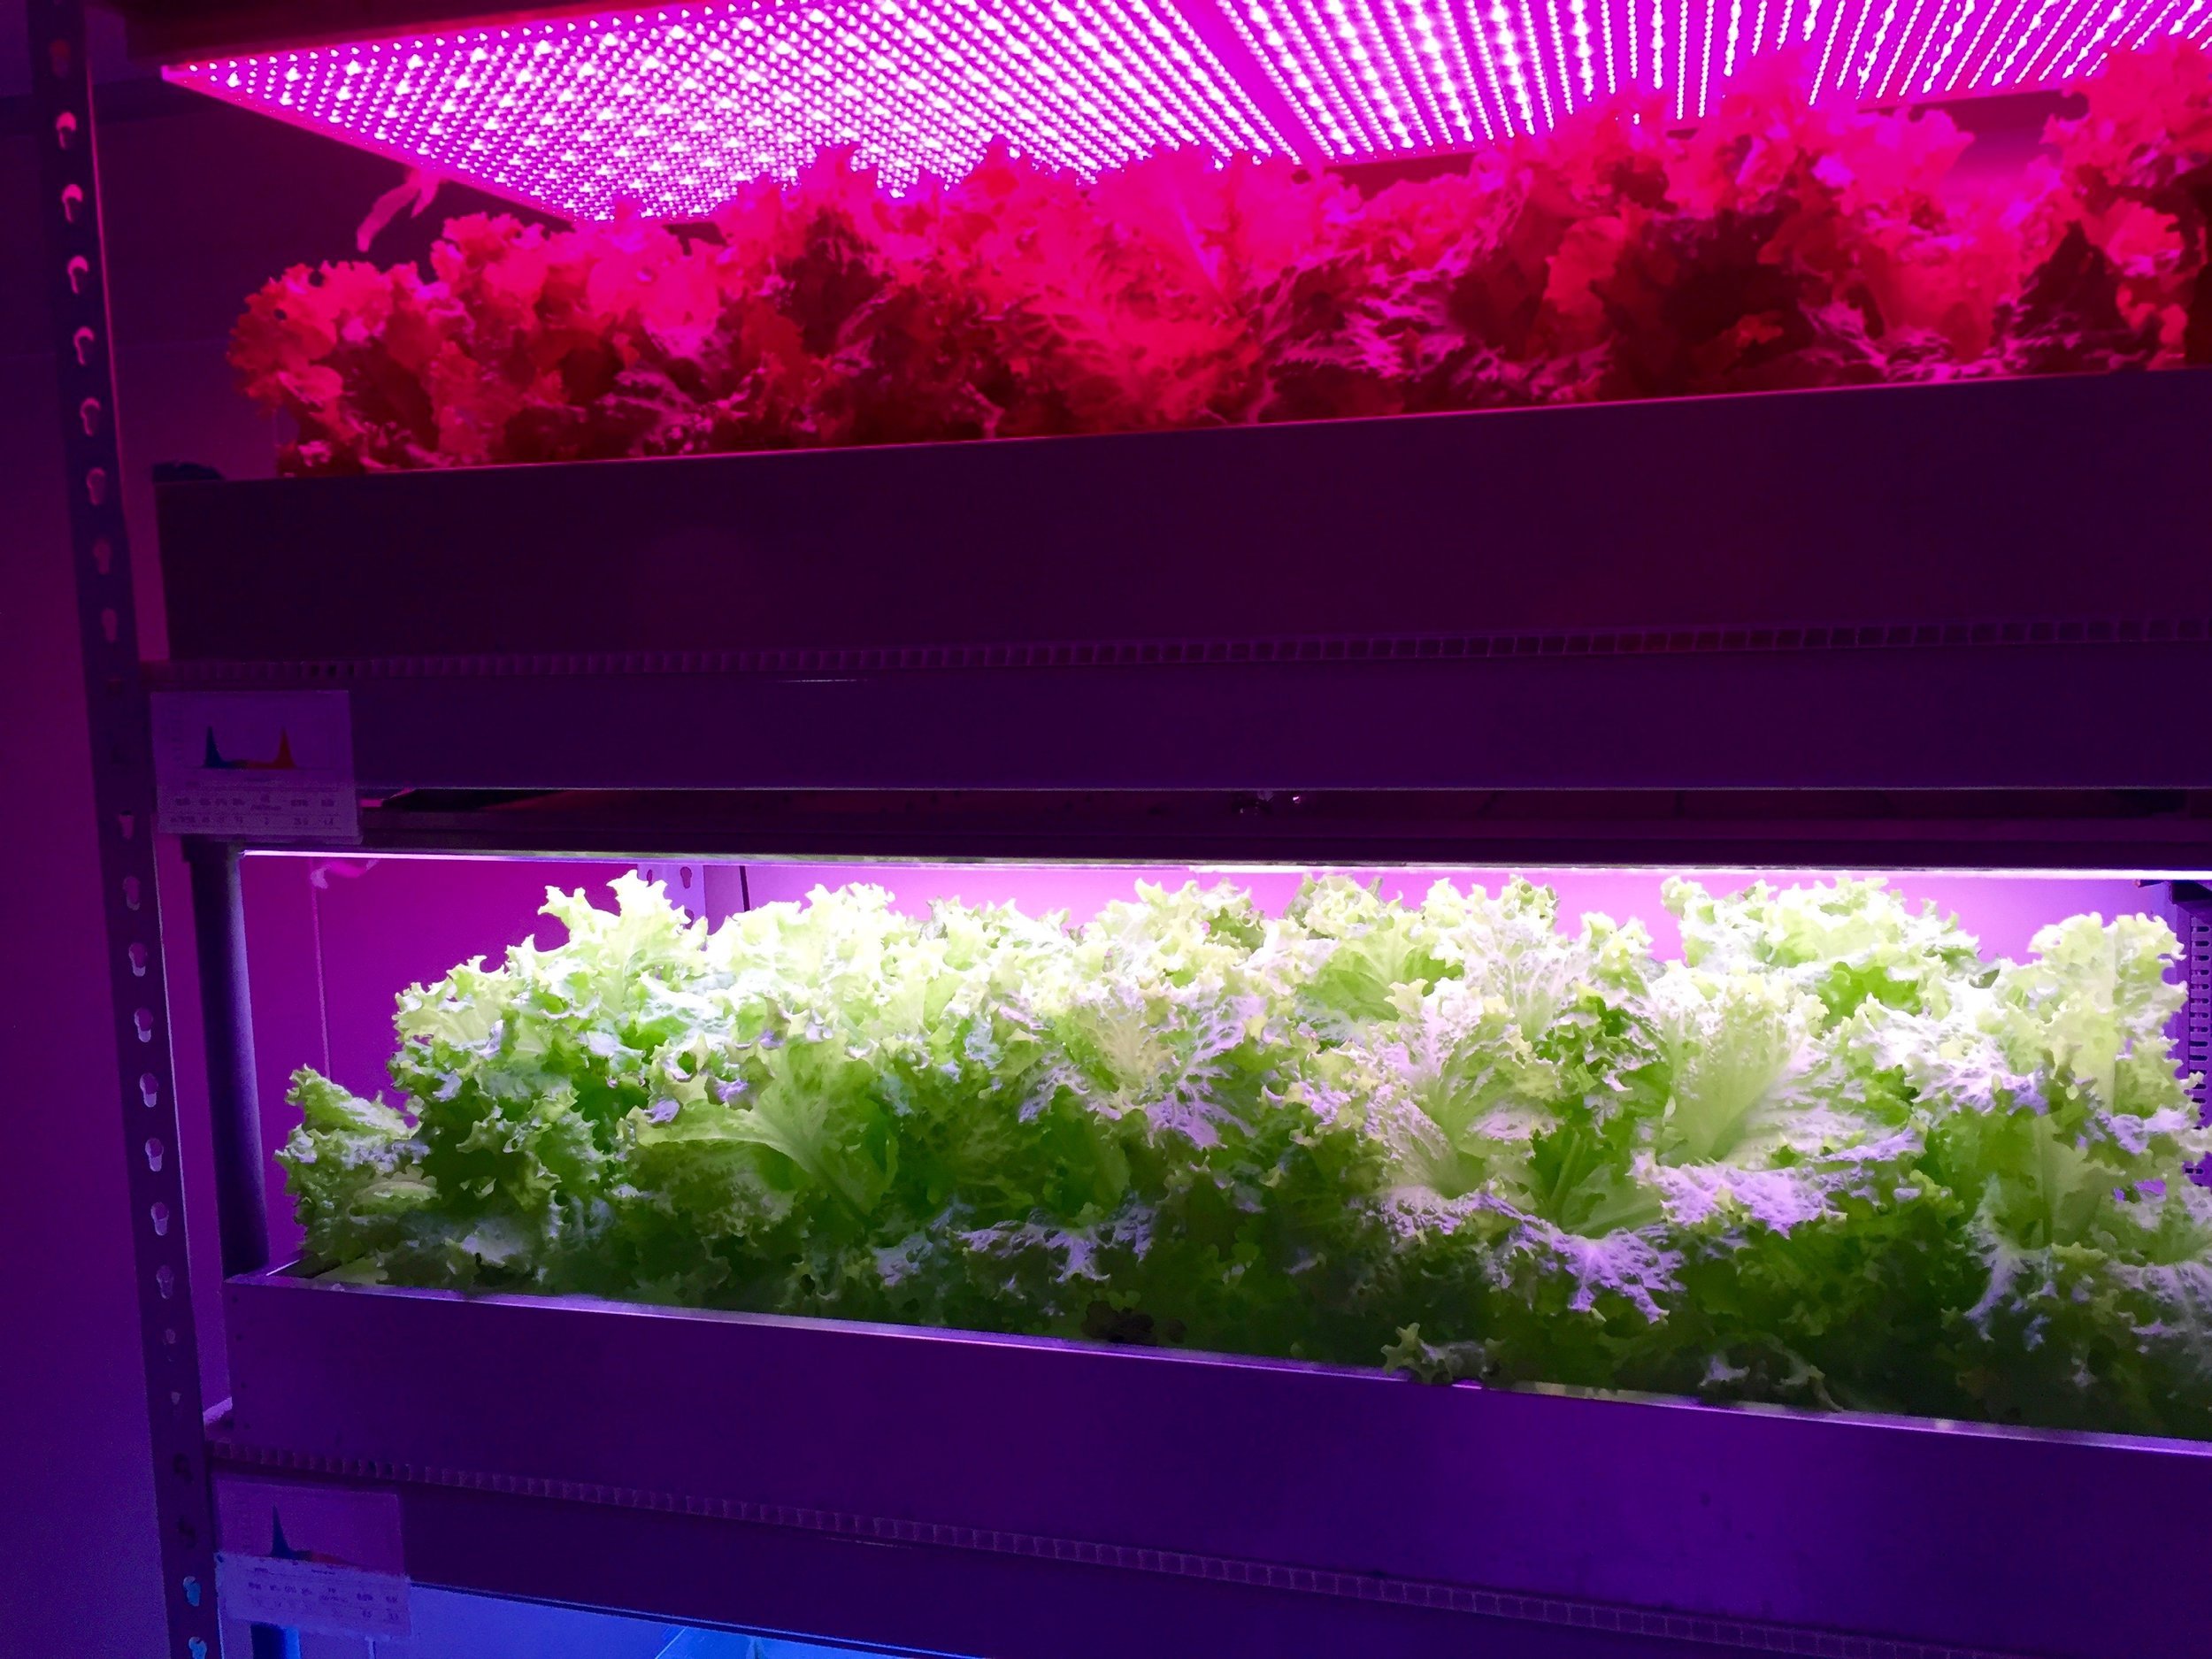 Lettuce growing in a vertically stacked hydroponic system under LED lights at National Taiwan University. (Credit: Jacob Eisenberg)